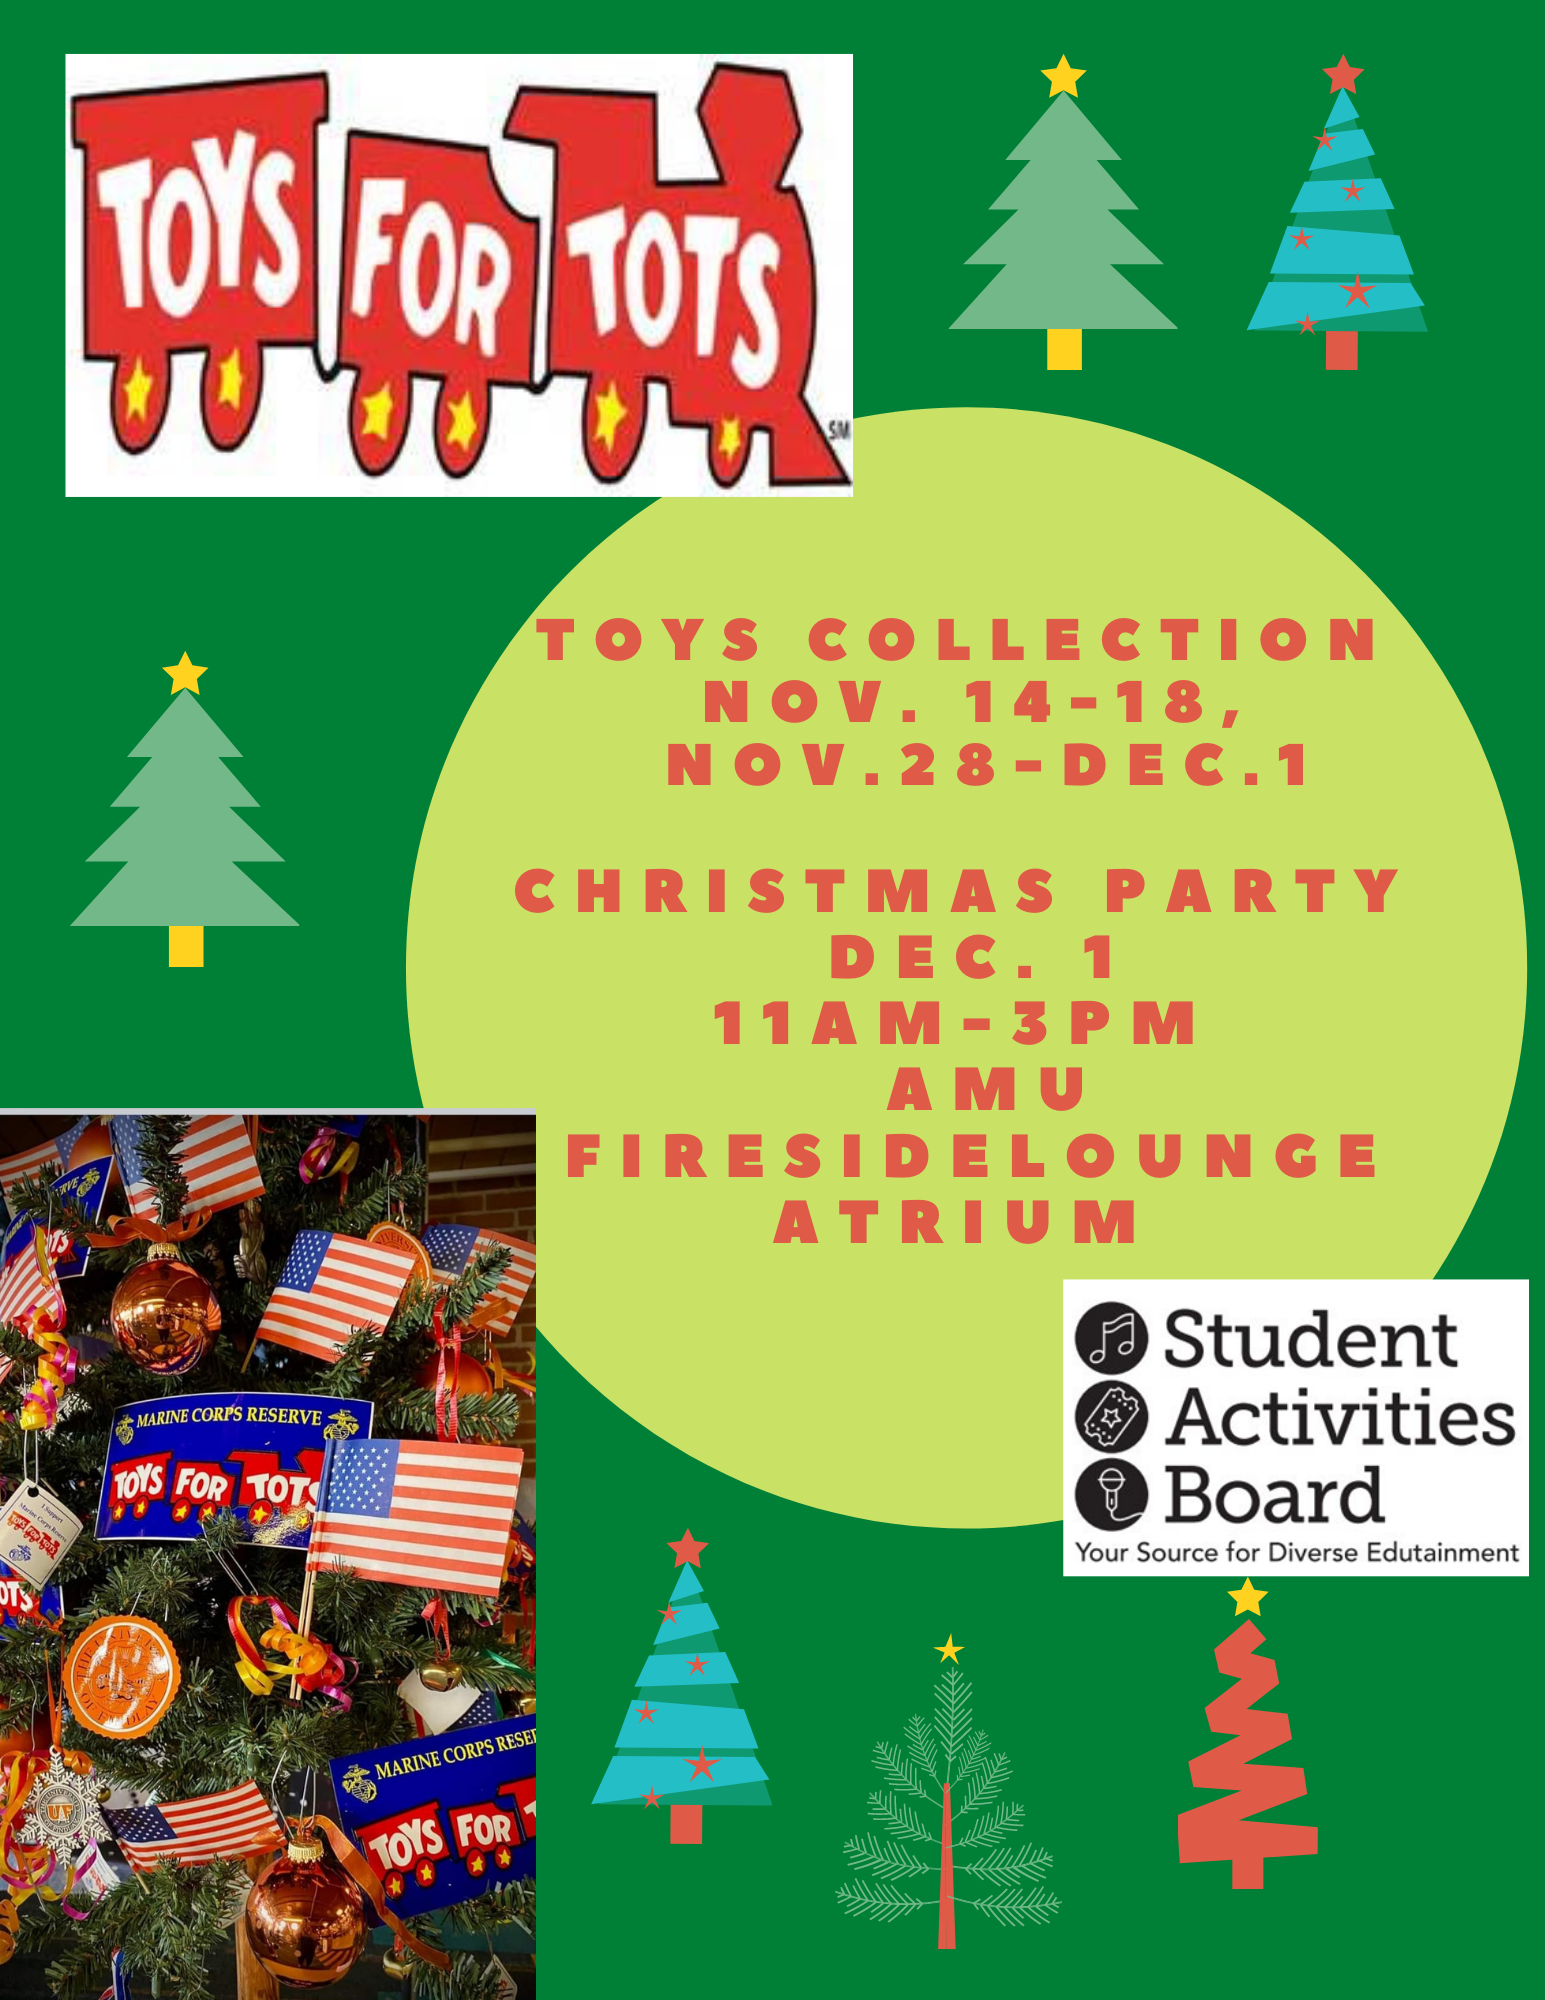 Copy of Toys for tots.png